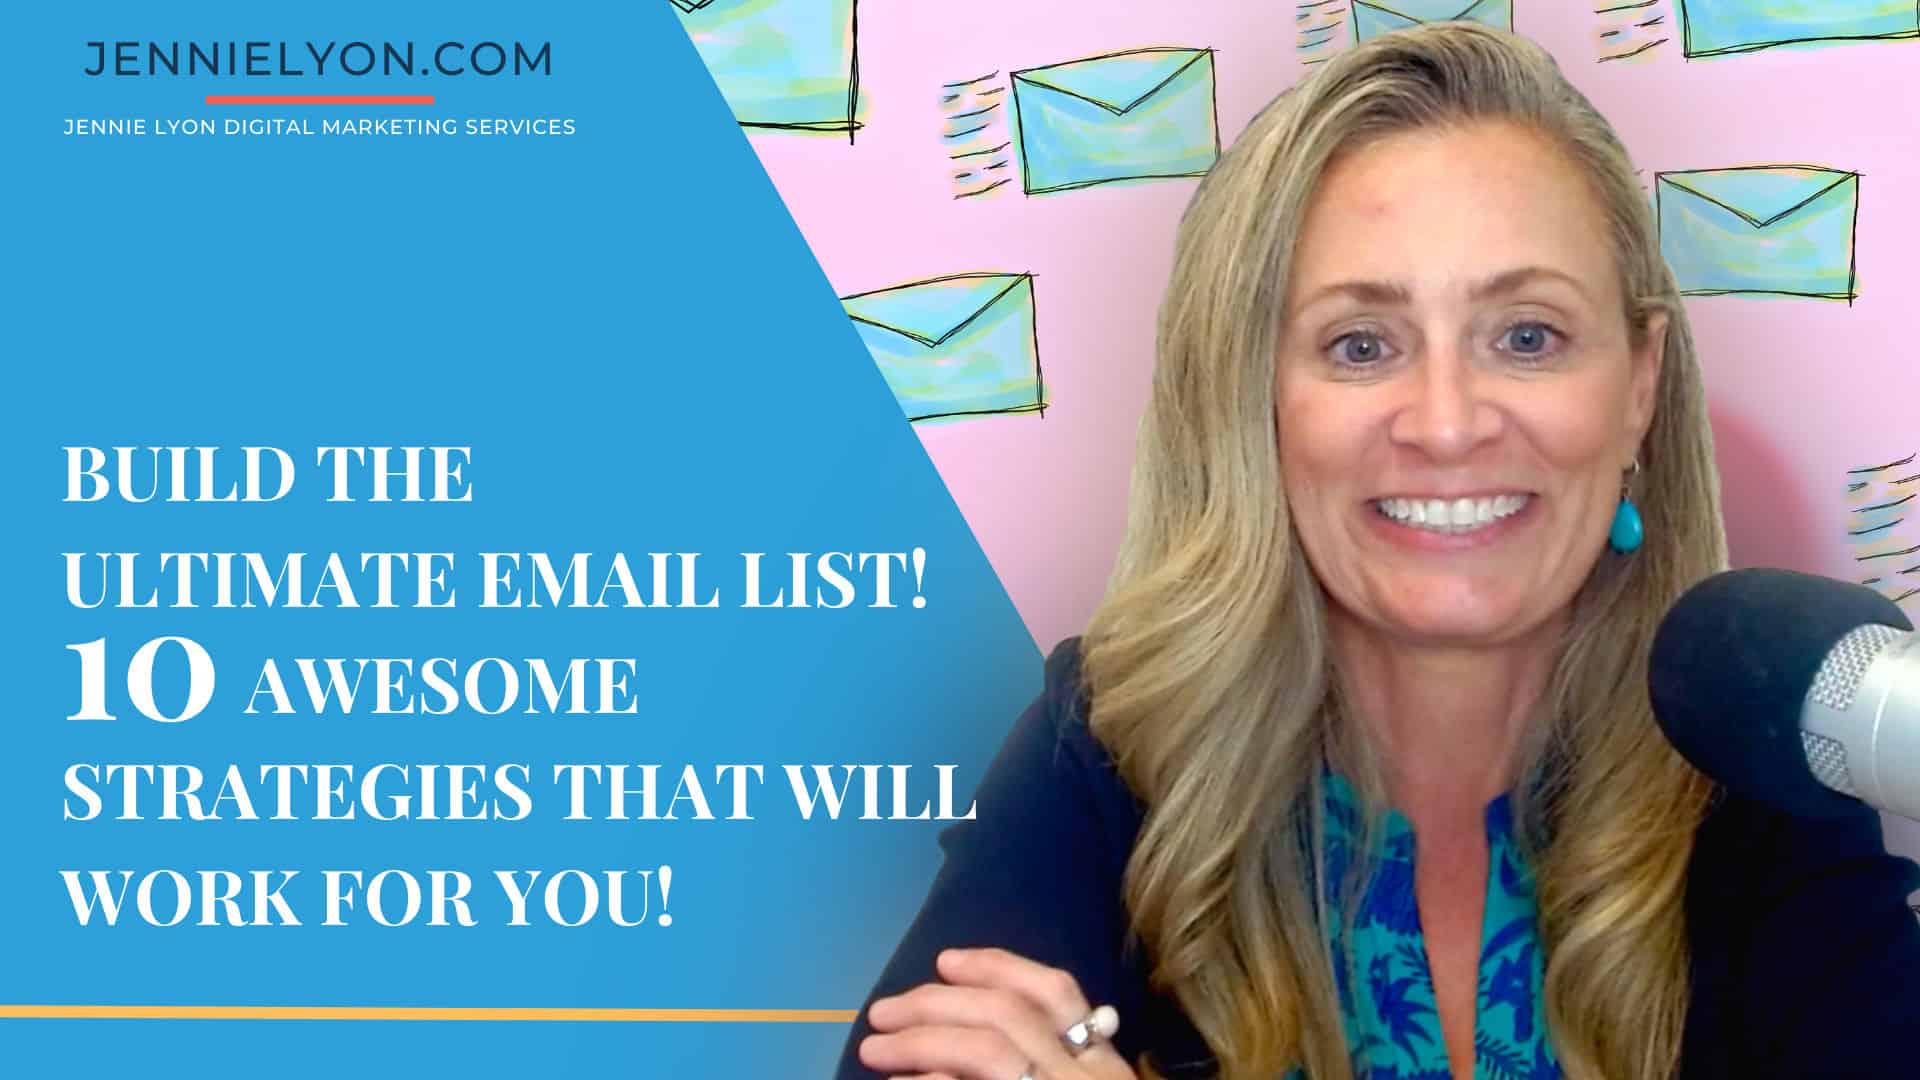 Build the Ultimate Email List! 10 Awesome Strategies That Will Work For You!